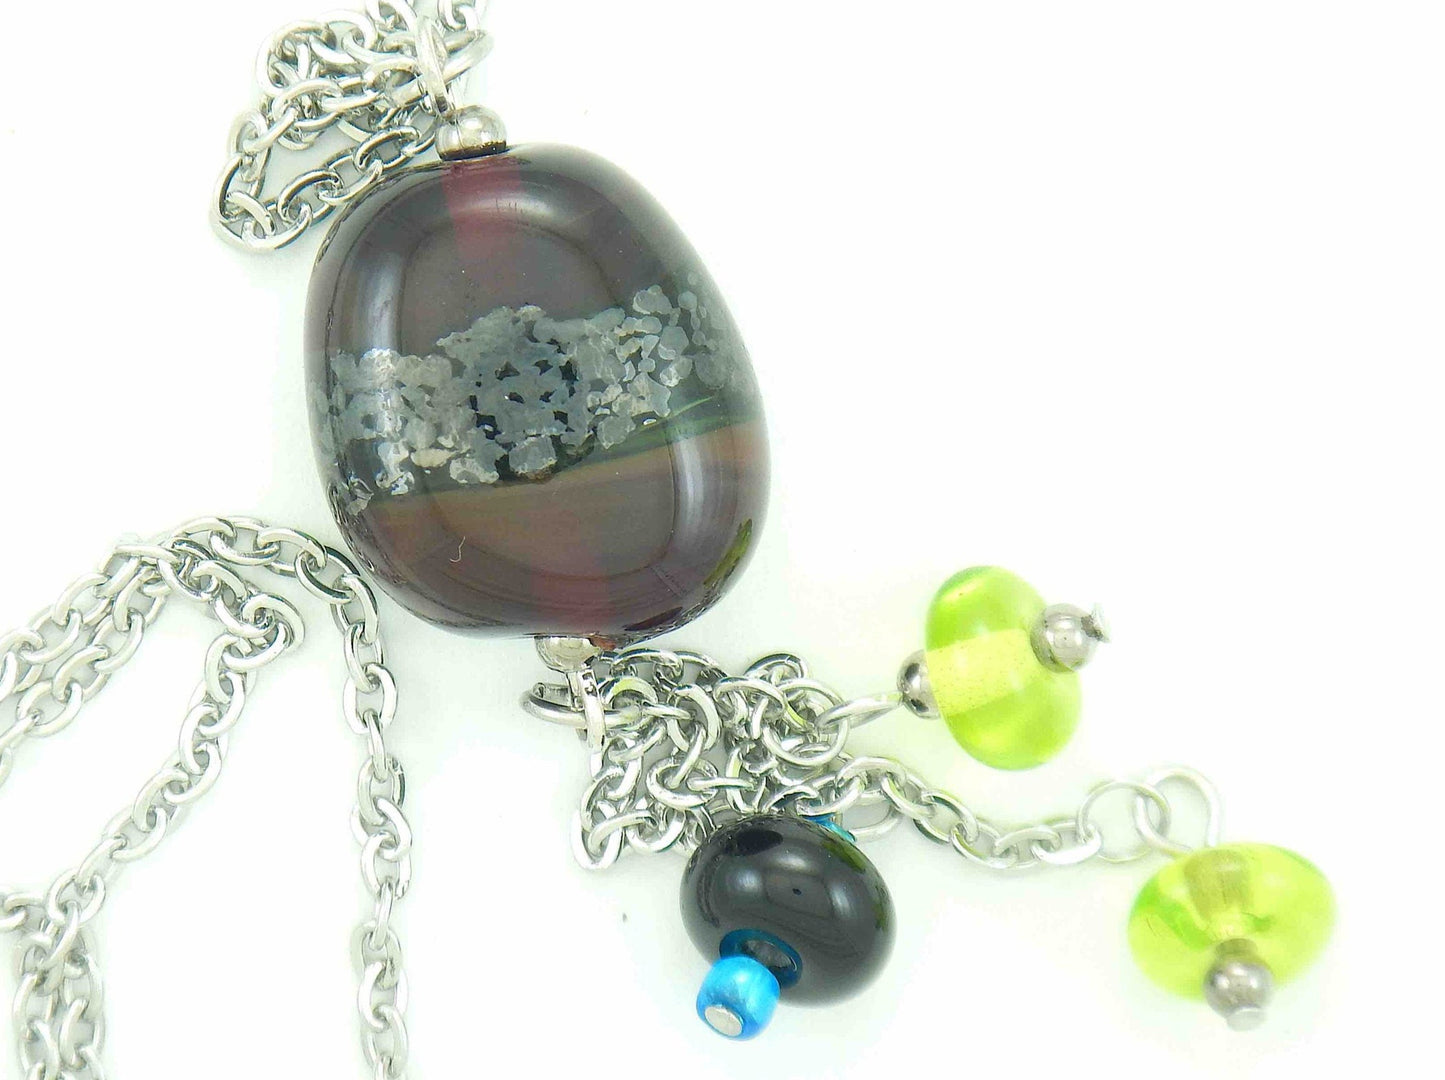 27-inch necklace with funky glass bead and matching pendants in dark red-lime green-black (Murano-style glass handmade in Montreal), stainless steel chain